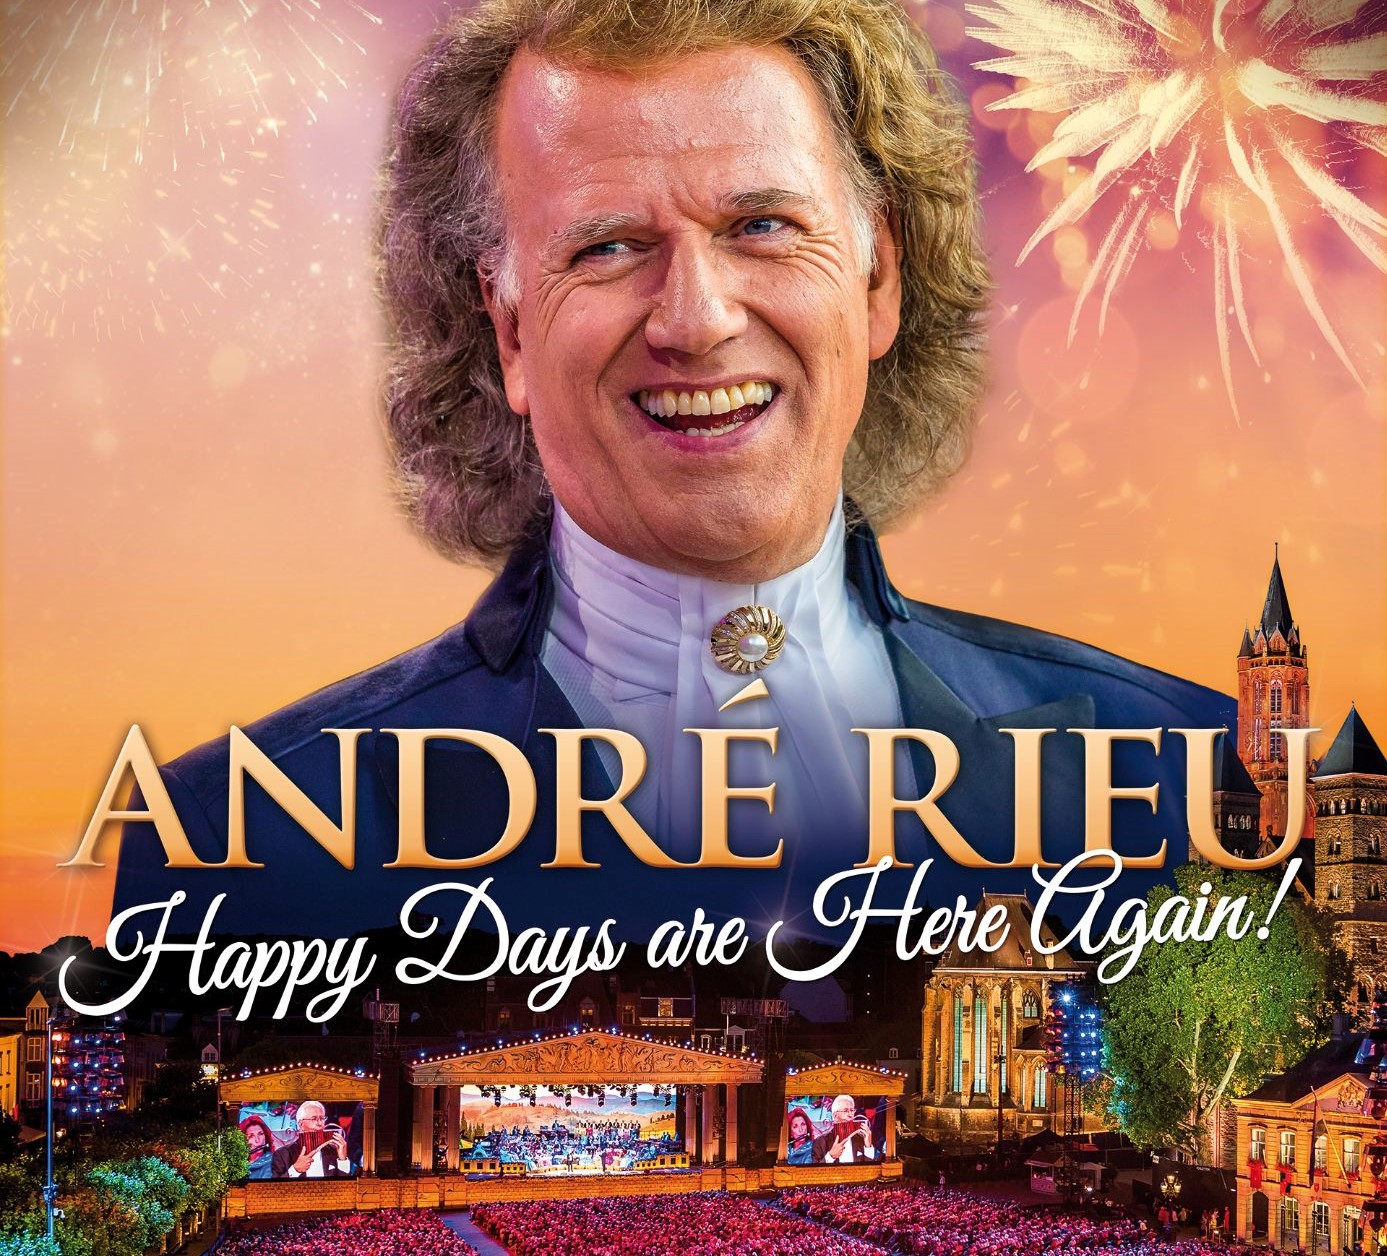 Andre-Rieu-Happy-days